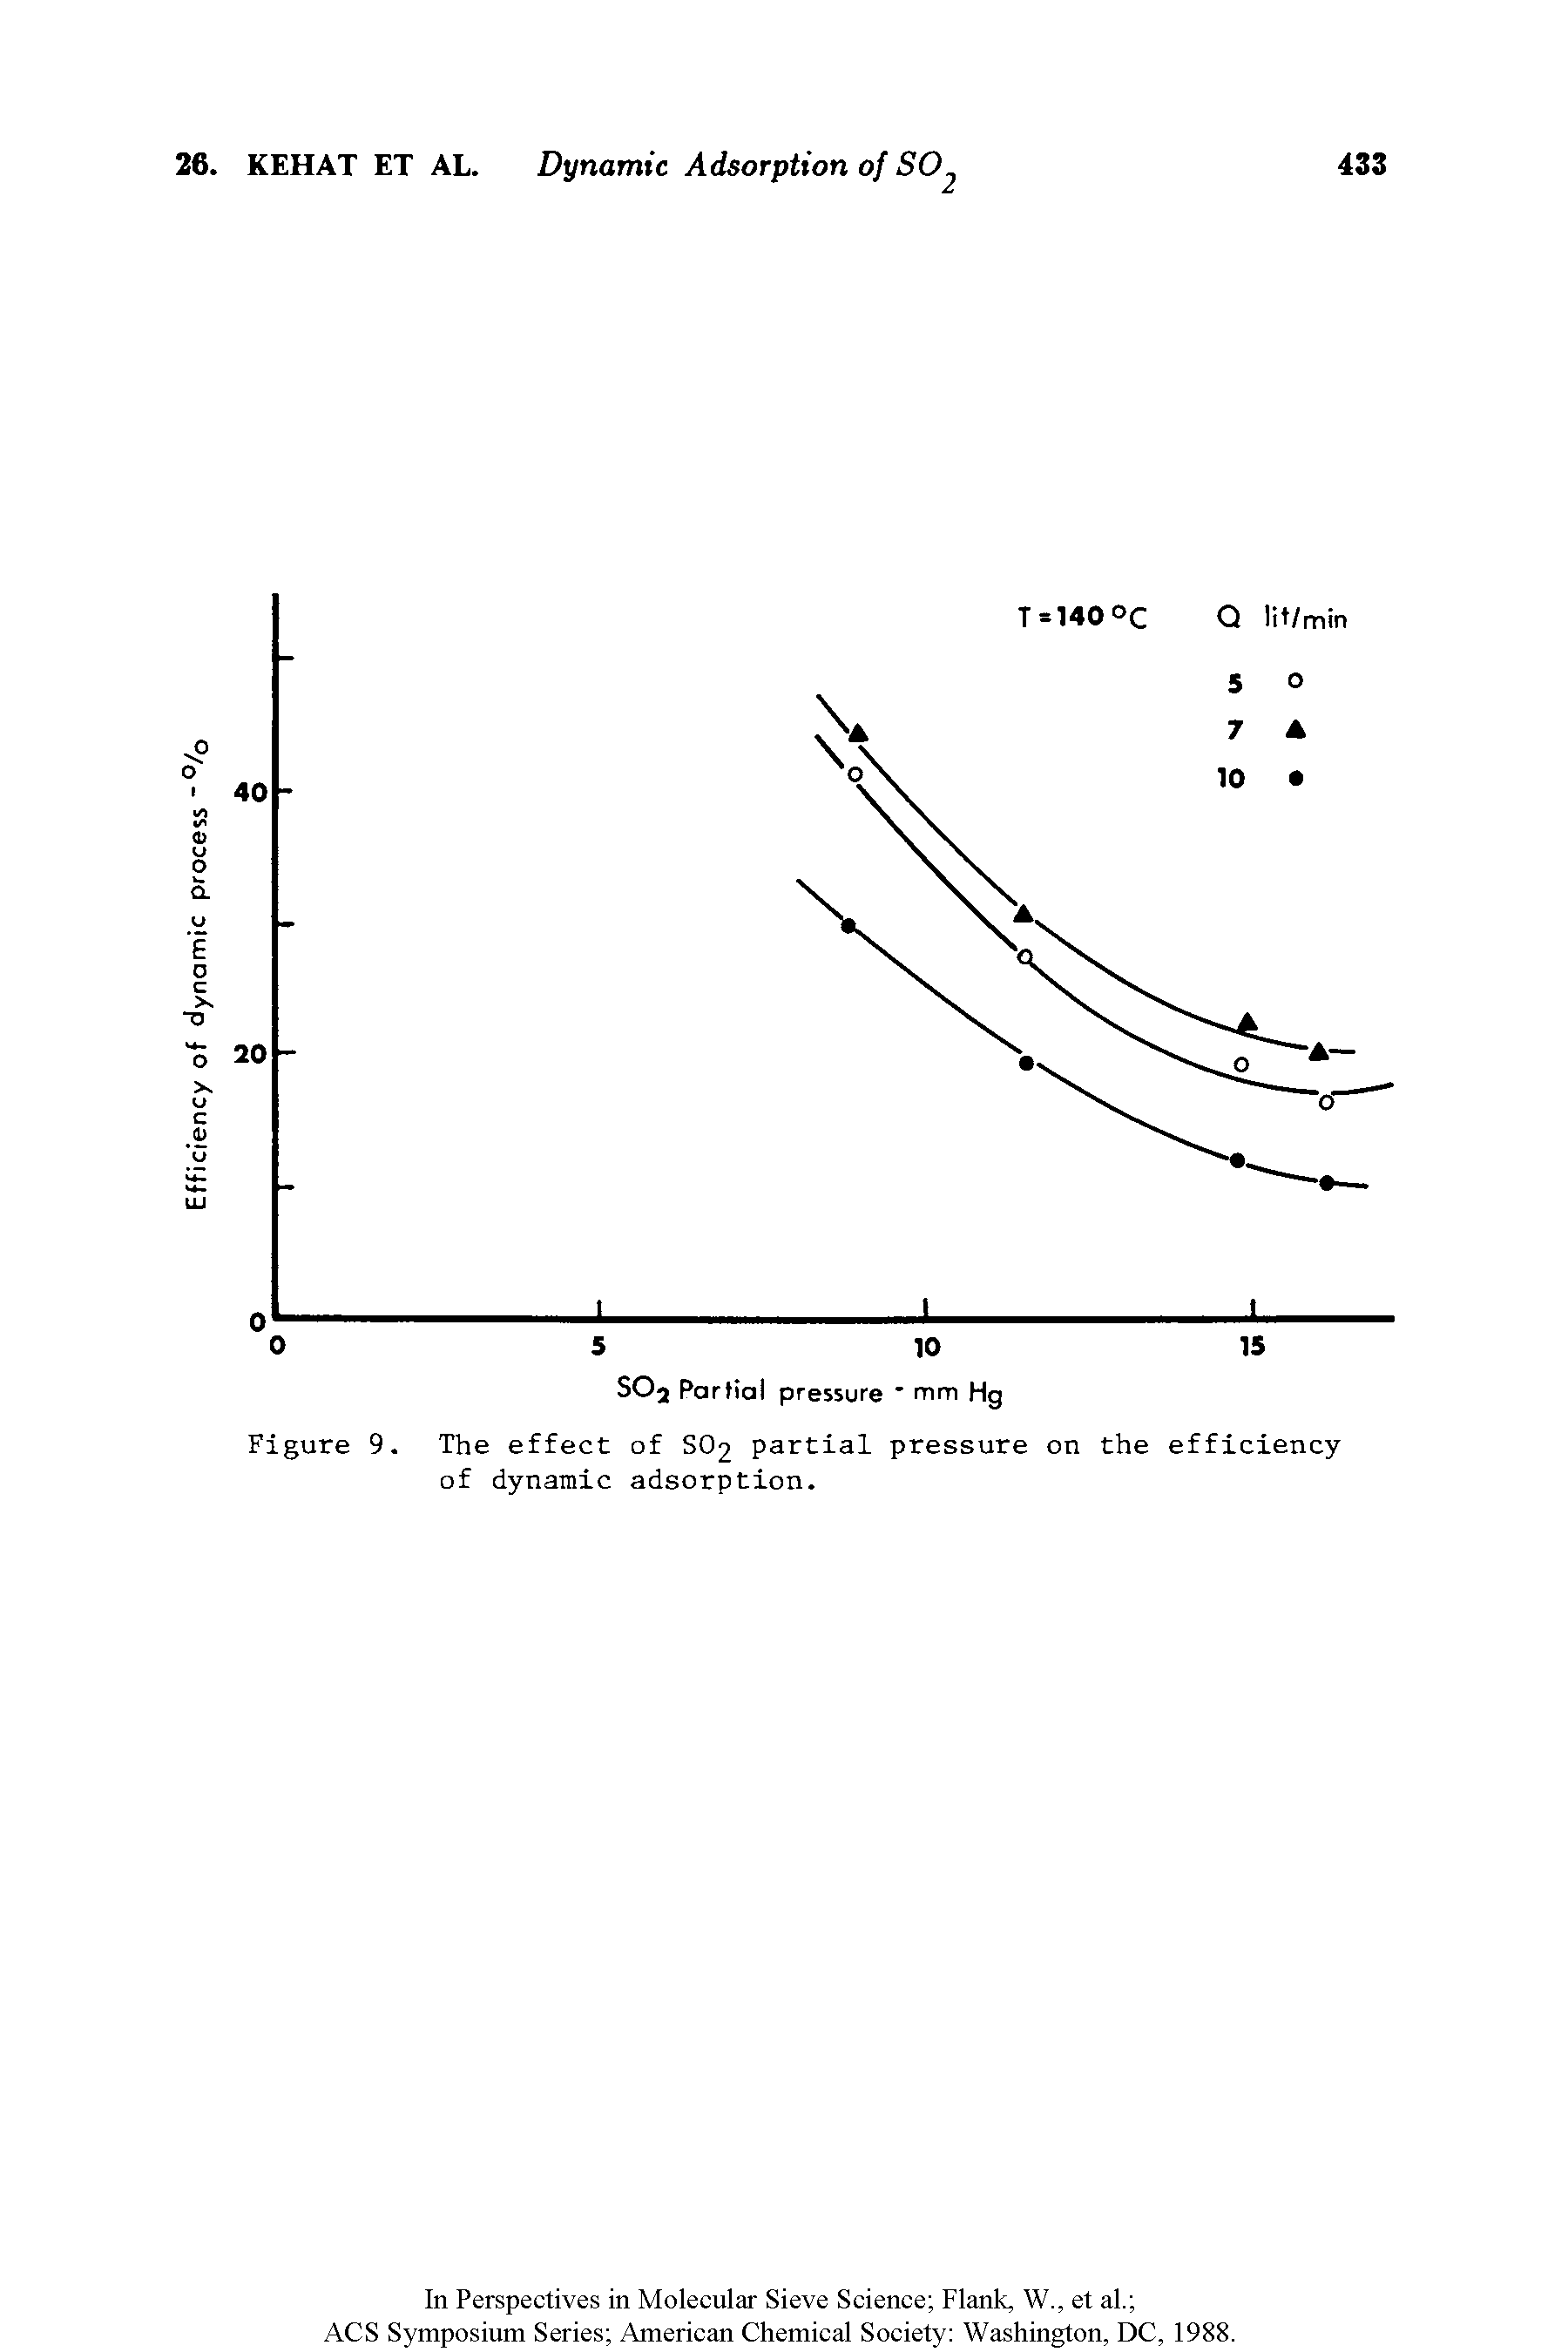 Figure 9. The effect of SO2 partial pressure on the efficiency of dynamic adsorption.